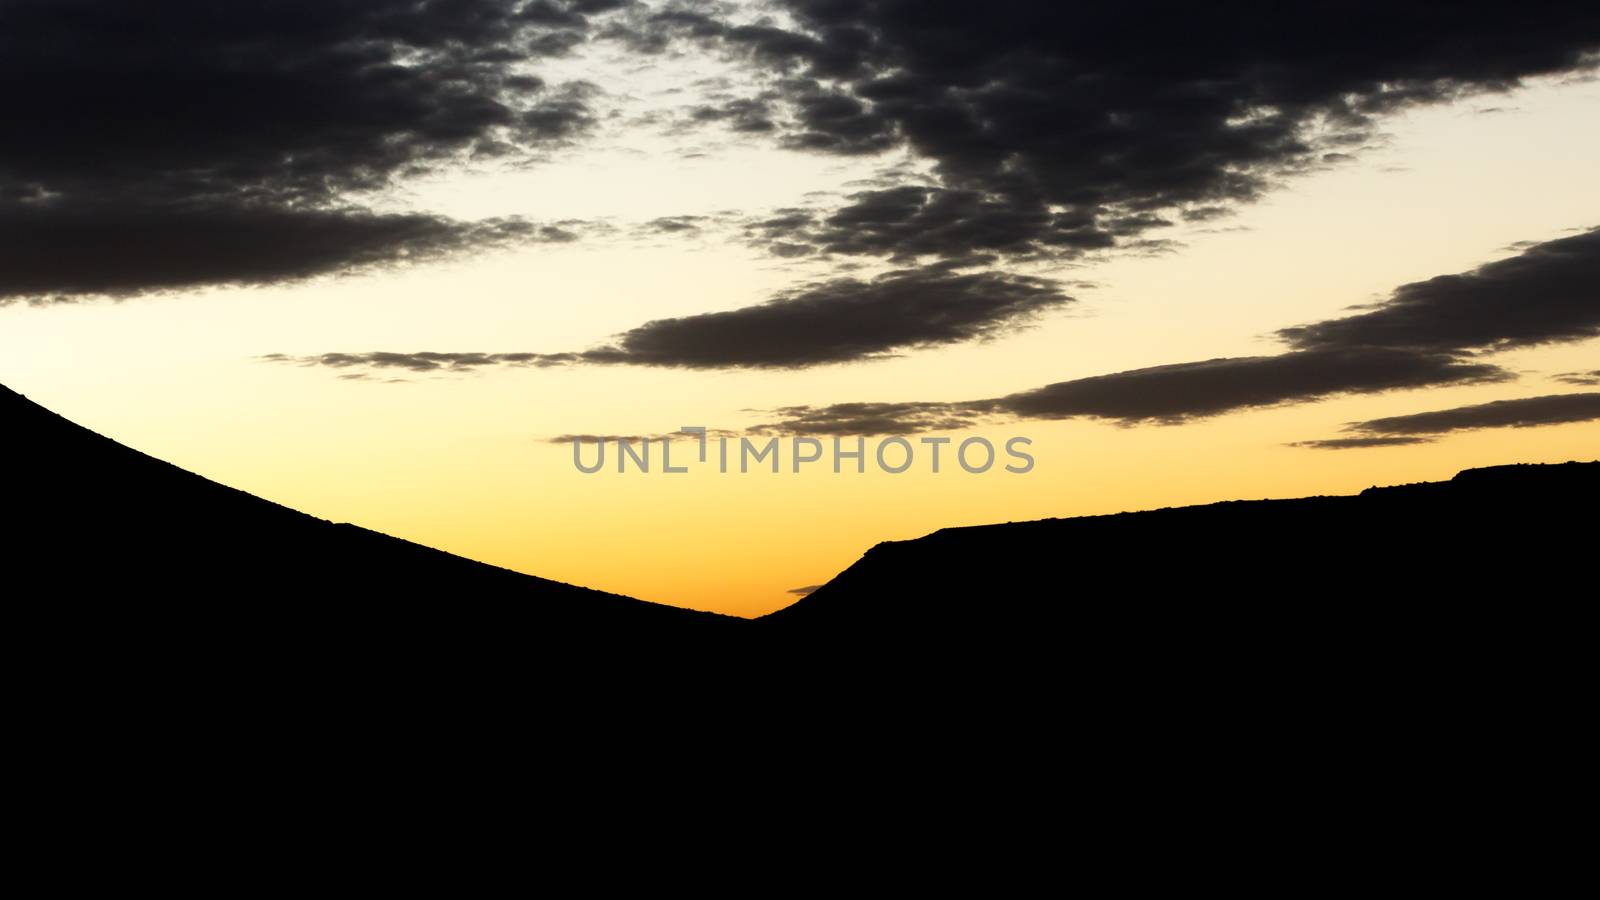 Cloudy Sundown - The Karoo National Park, founded in 1979, is a wildlife reserve in the Great Karoo area of the Western Cape, South Africa near Beaufort West.